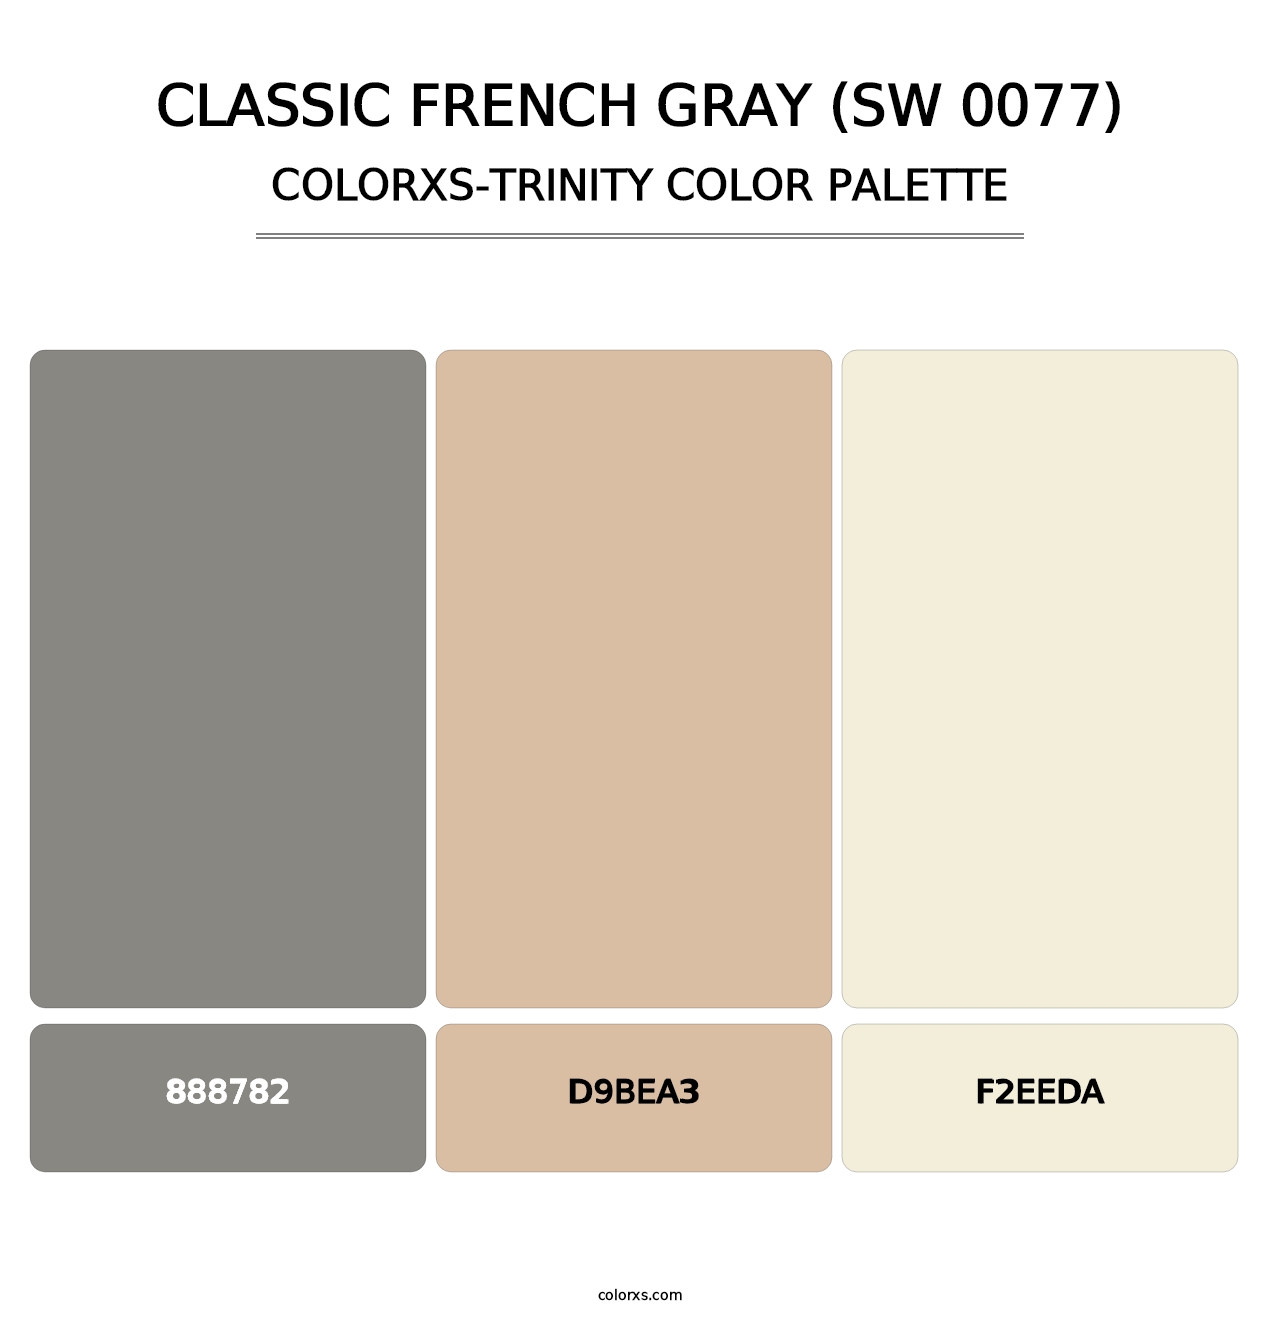 Classic French Gray (SW 0077) - Colorxs Trinity Palette